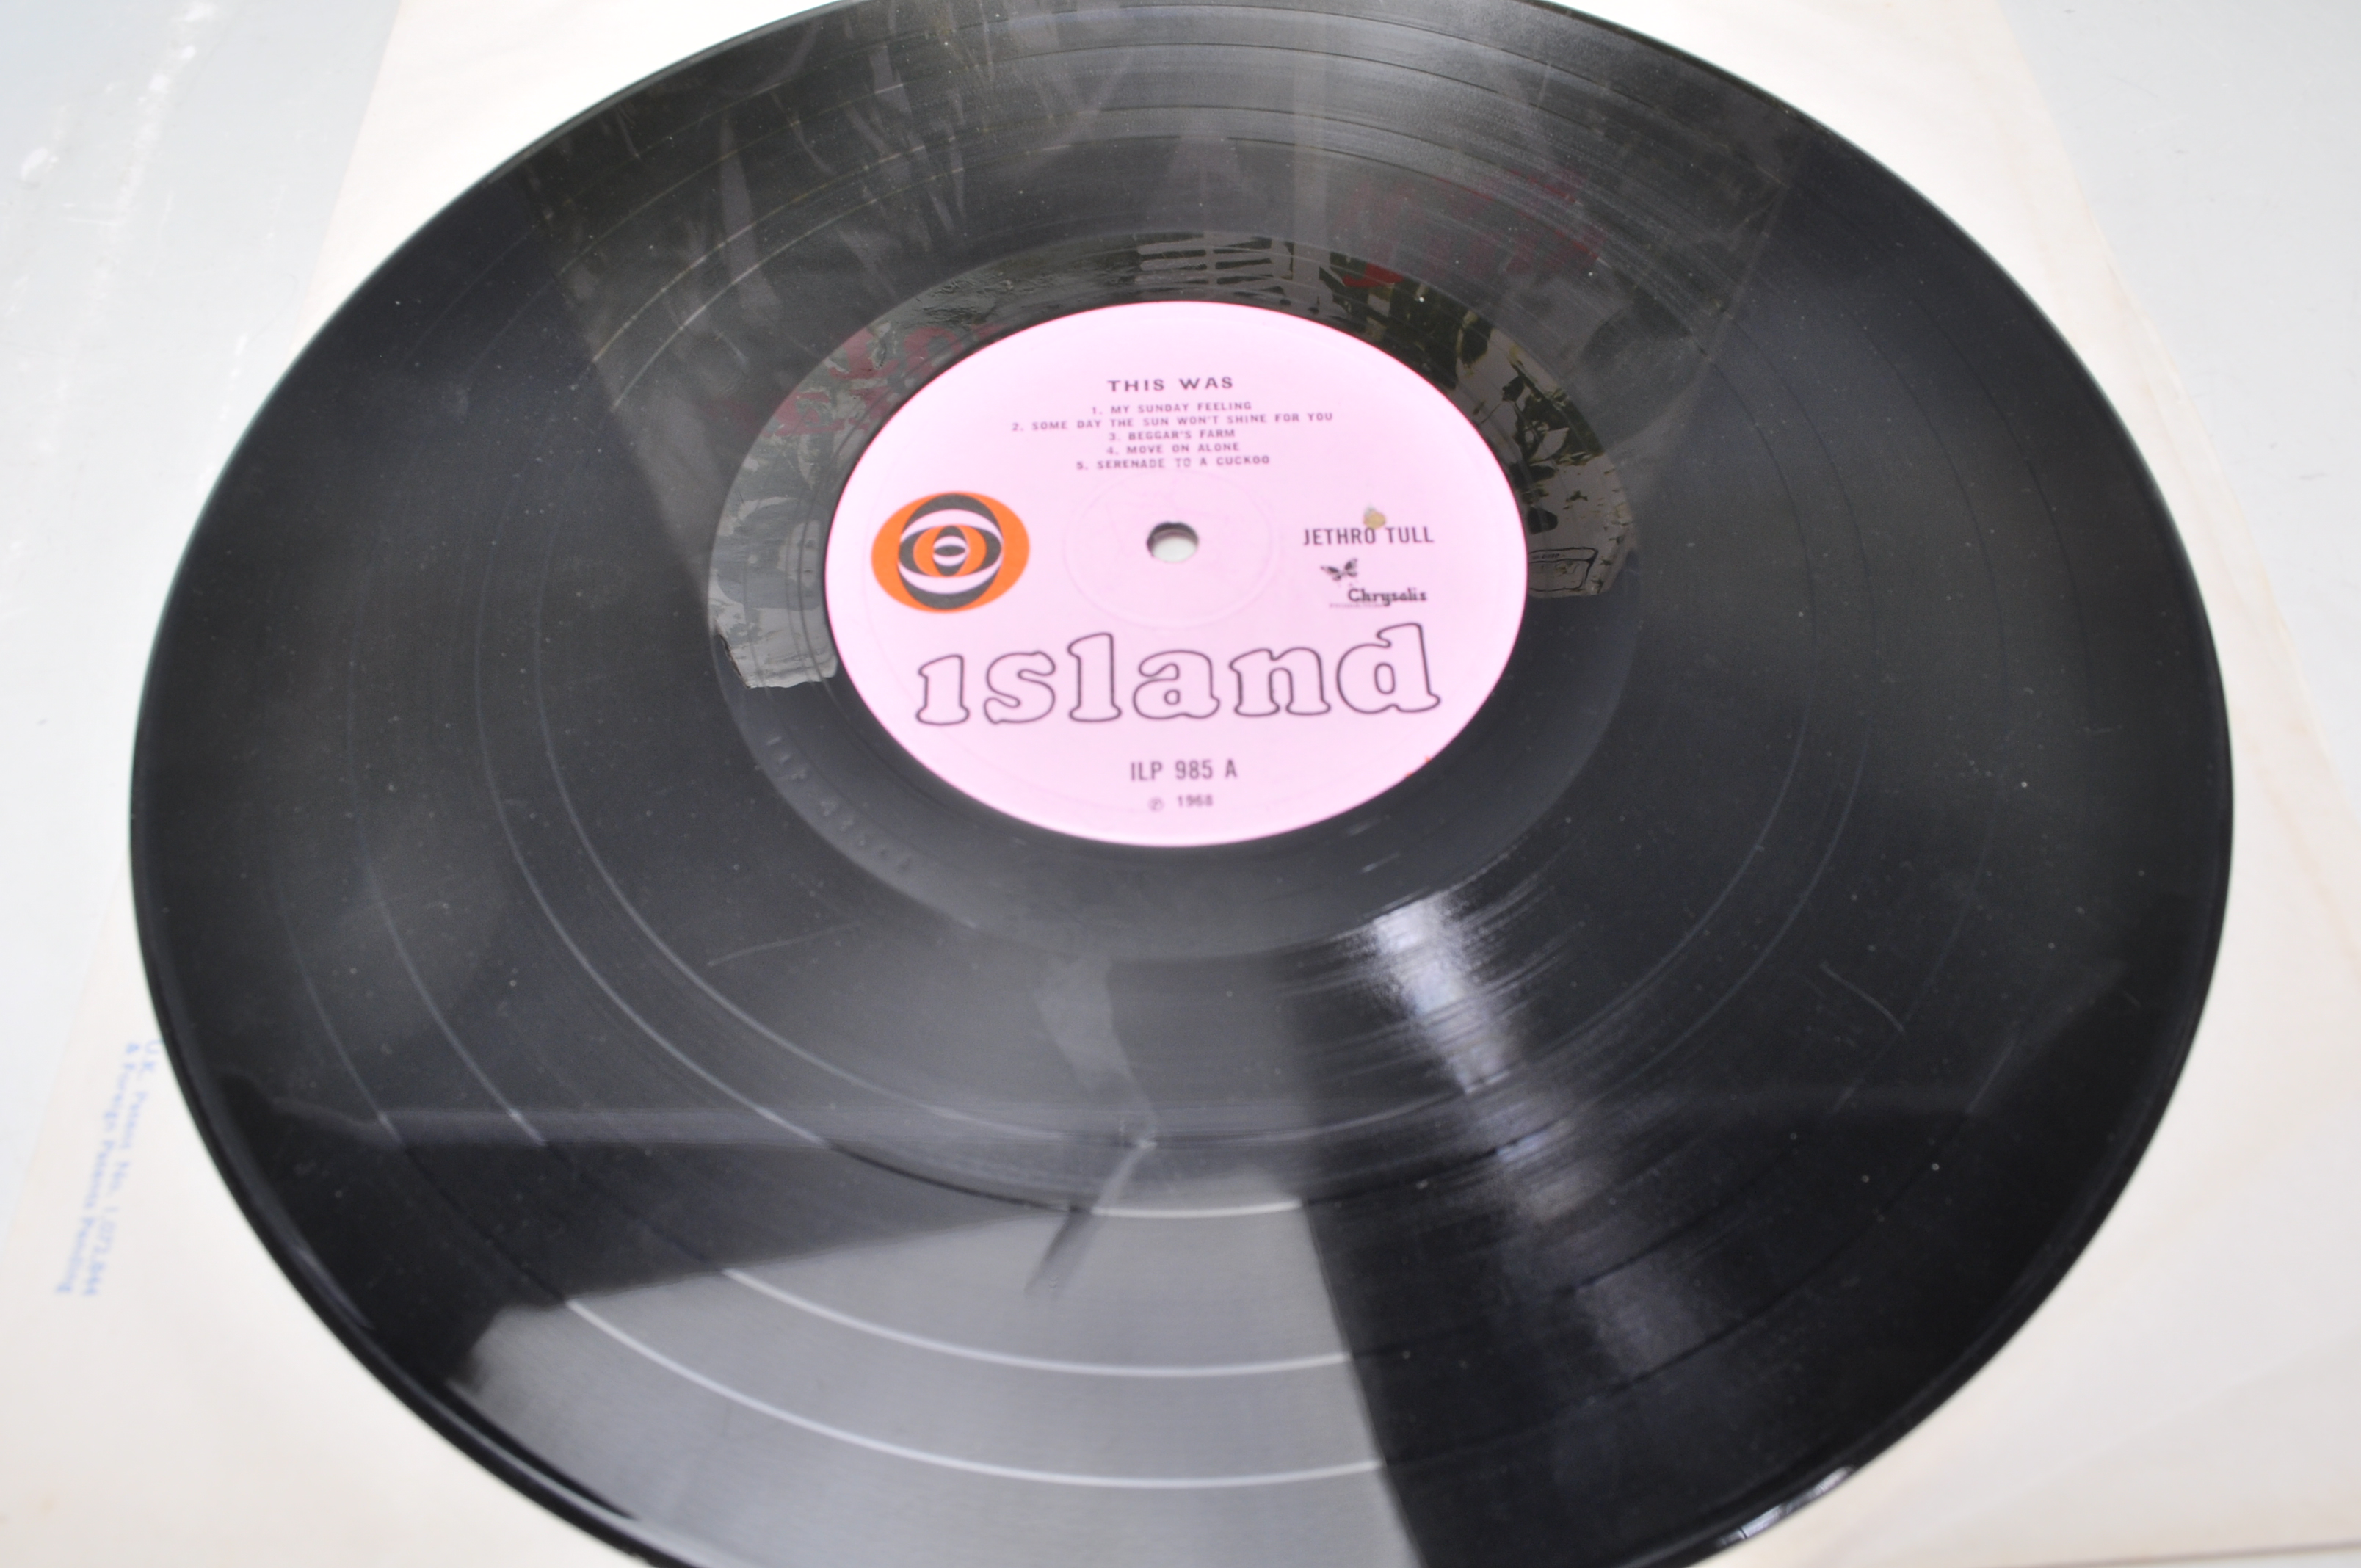 A vinyl long play LP record album by Jethro Tull – This Was – Original Island Records 1st U.K. Press - Image 4 of 5